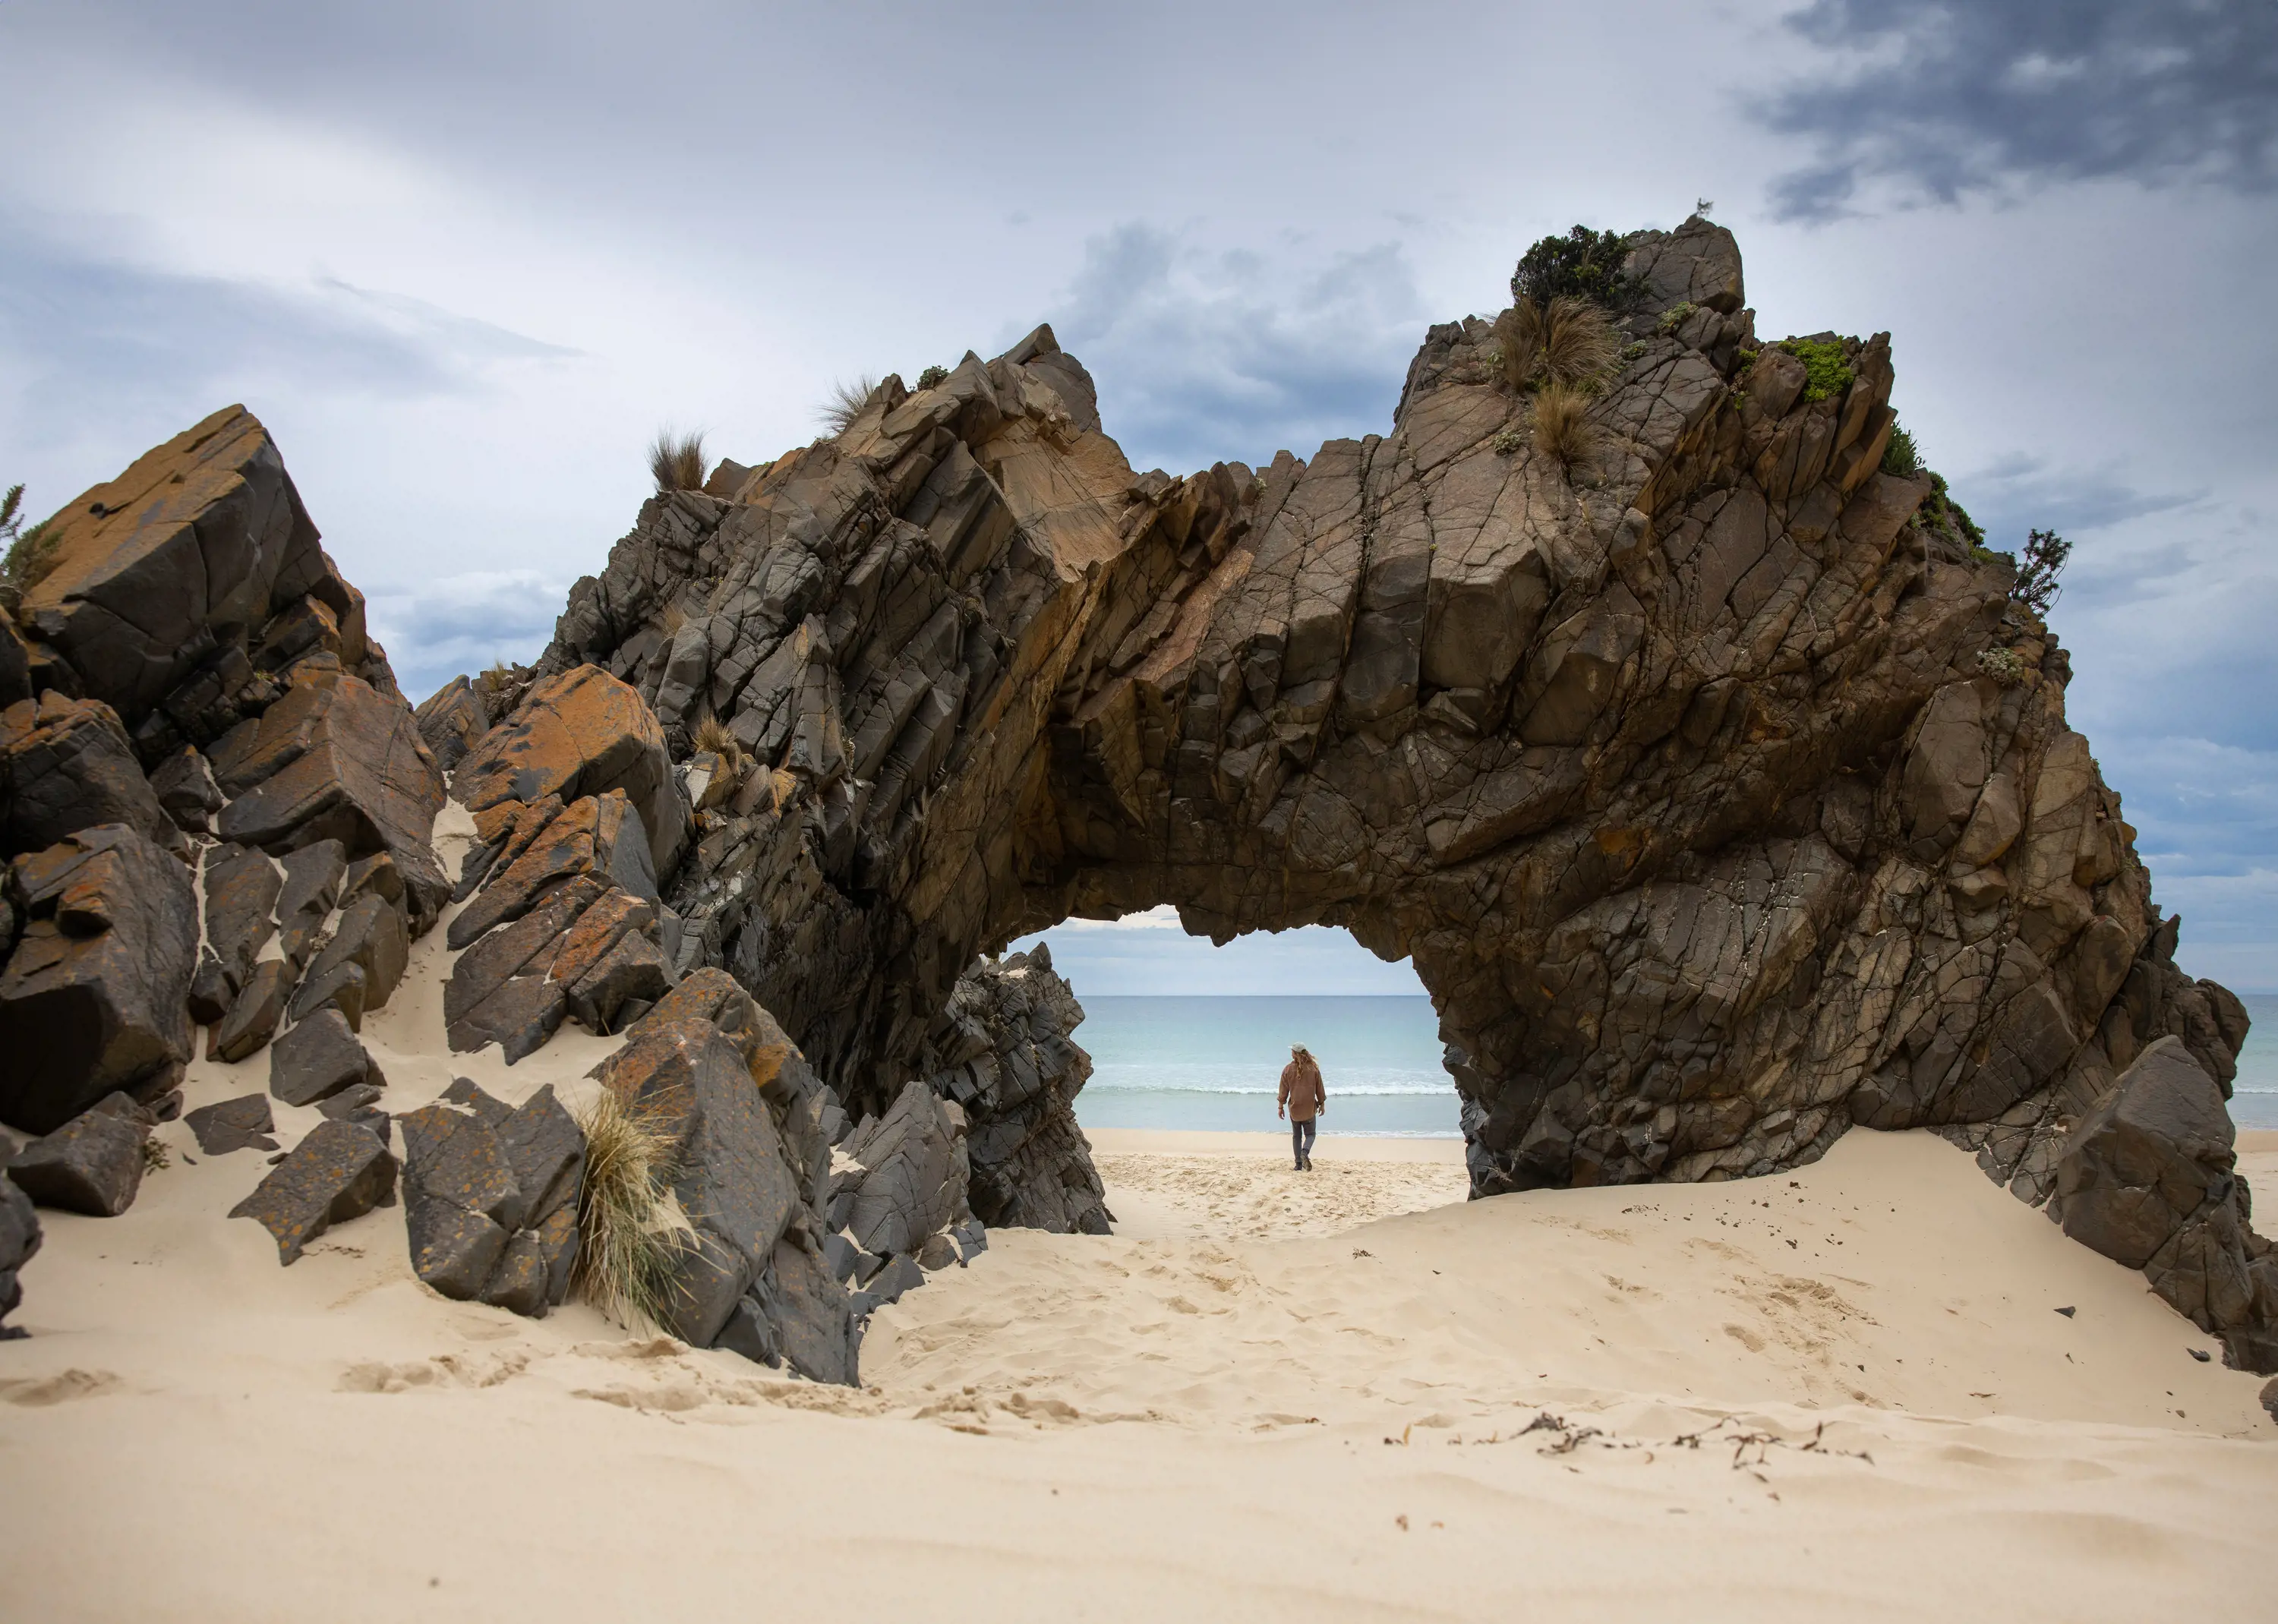 A man walks along the sand, seen through the arch of a large rock formation jutting out of sand in the foreground.